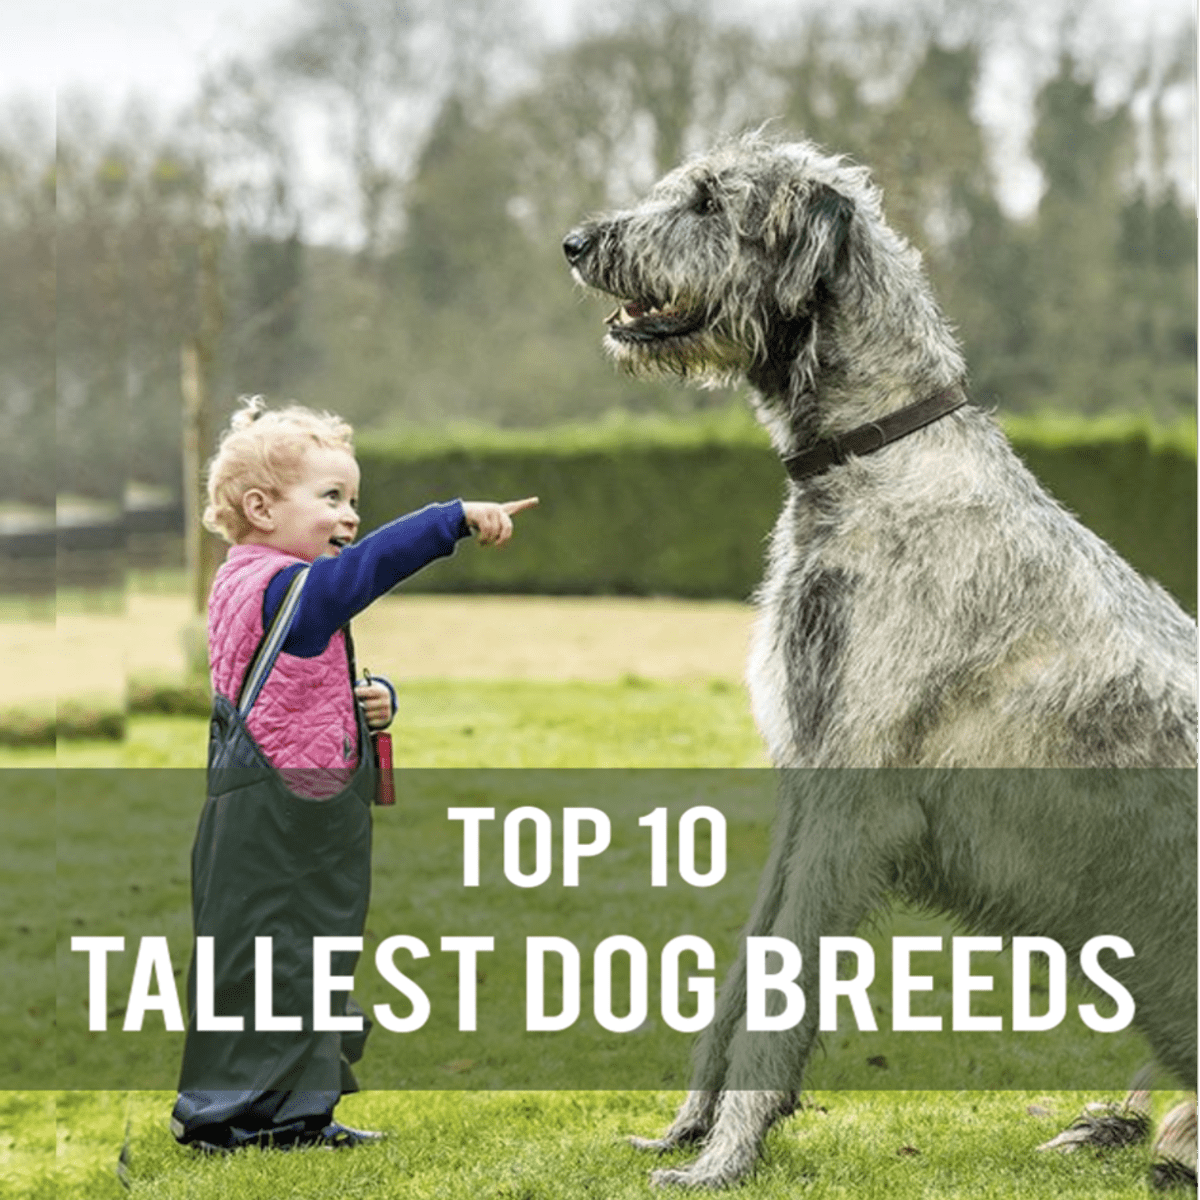 What Are the Top 10 Tallest Dog Breeds? - PetHelpful